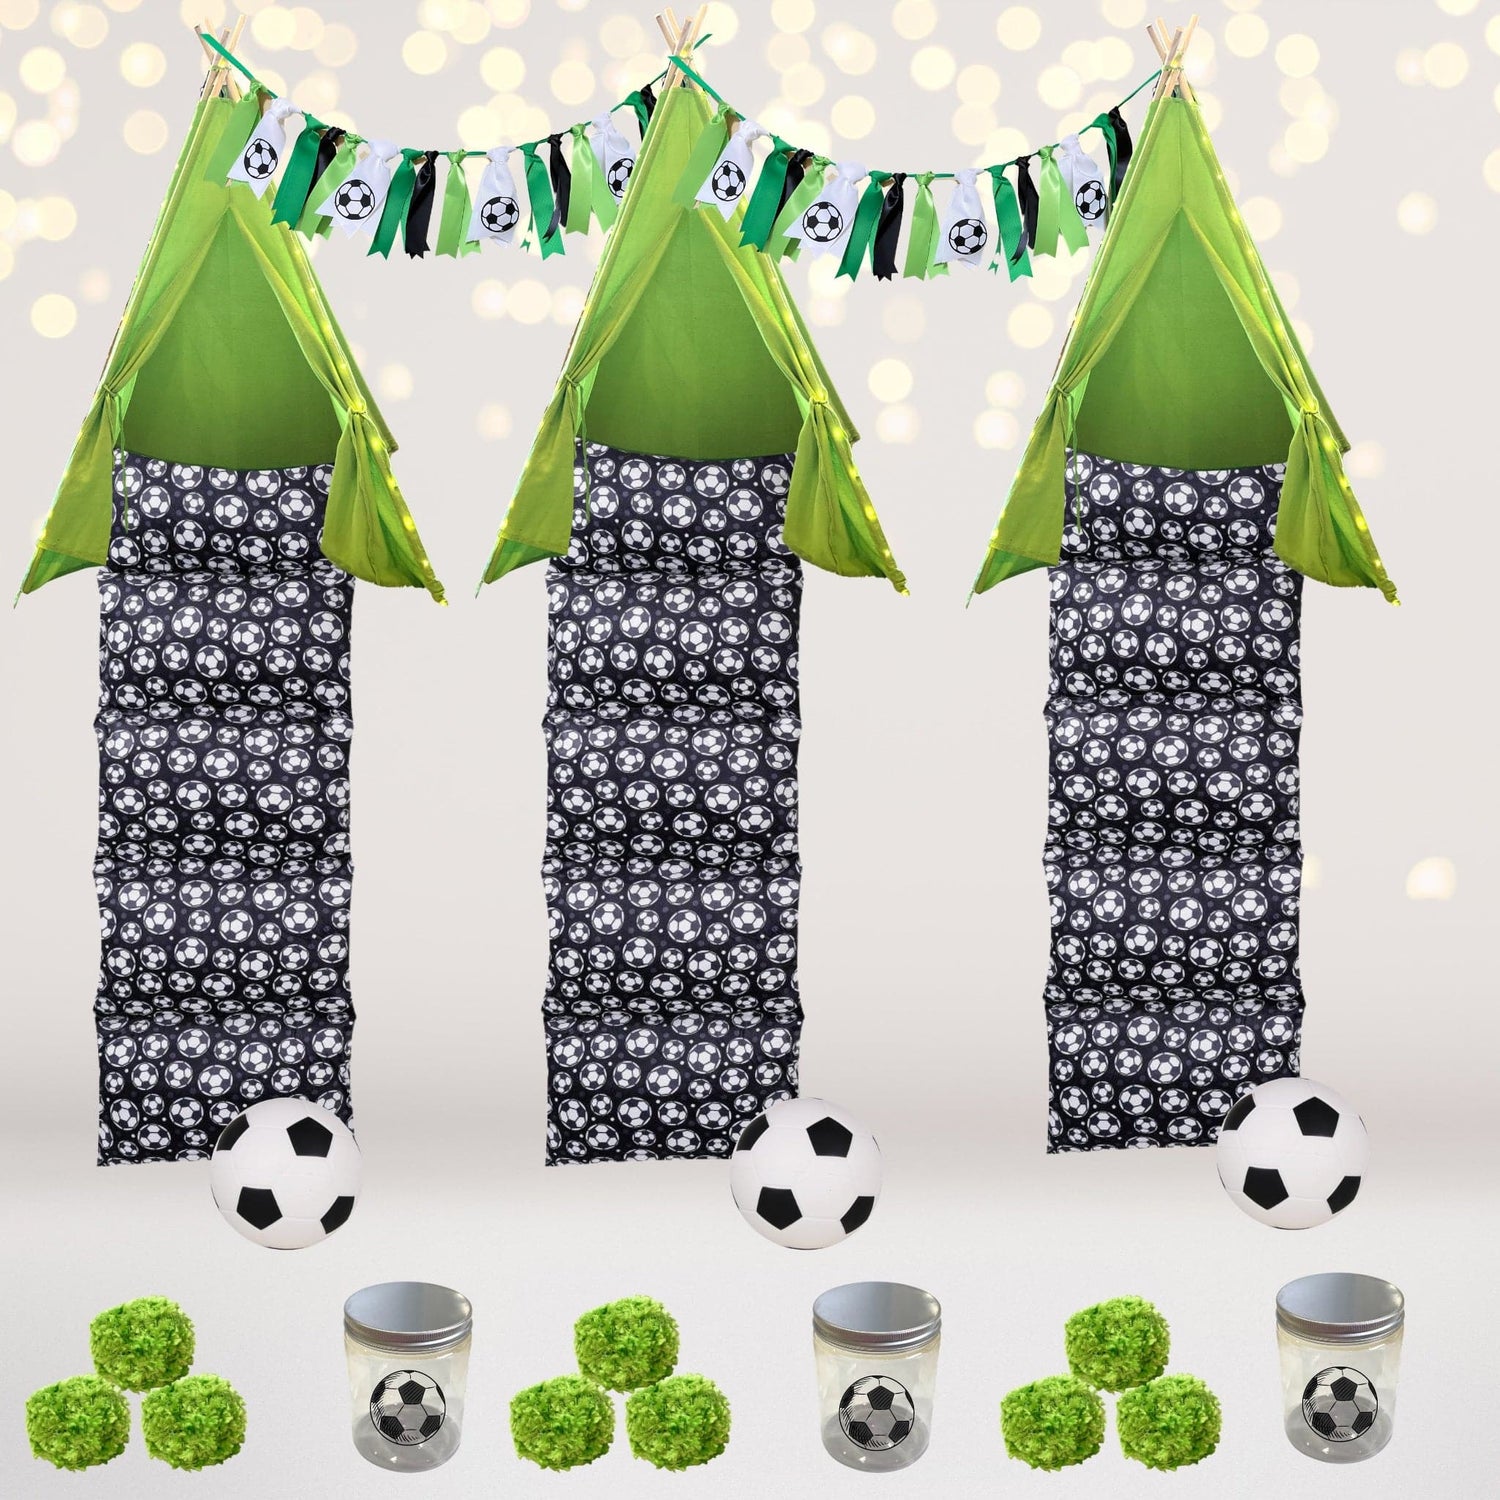 Party Bundle - Soccer Sleepover Party Set, Tee Pee Soccer Birthday Party Box